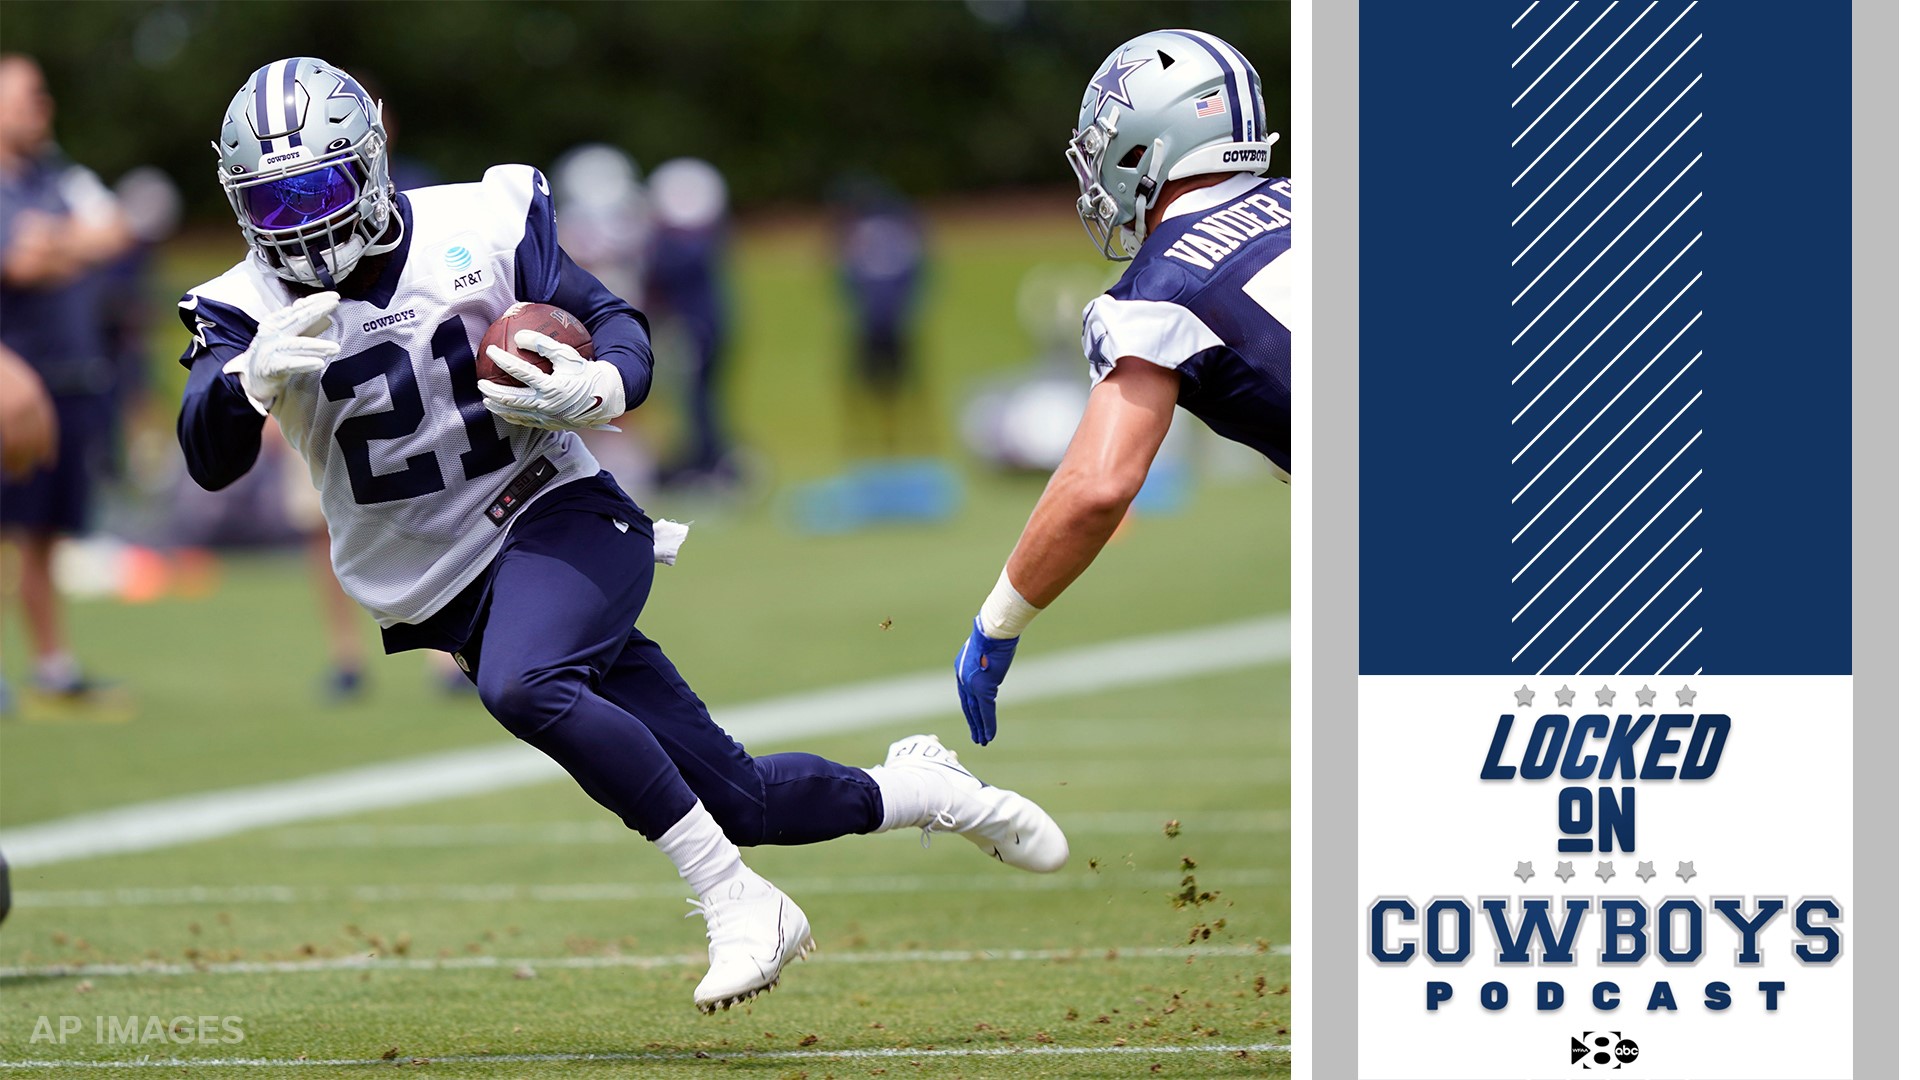 In this episode of Locked On Cowboys, Marcus Mosher and Landon McCool preview all of the running backs on the Cowboys' roster heading into training camp.